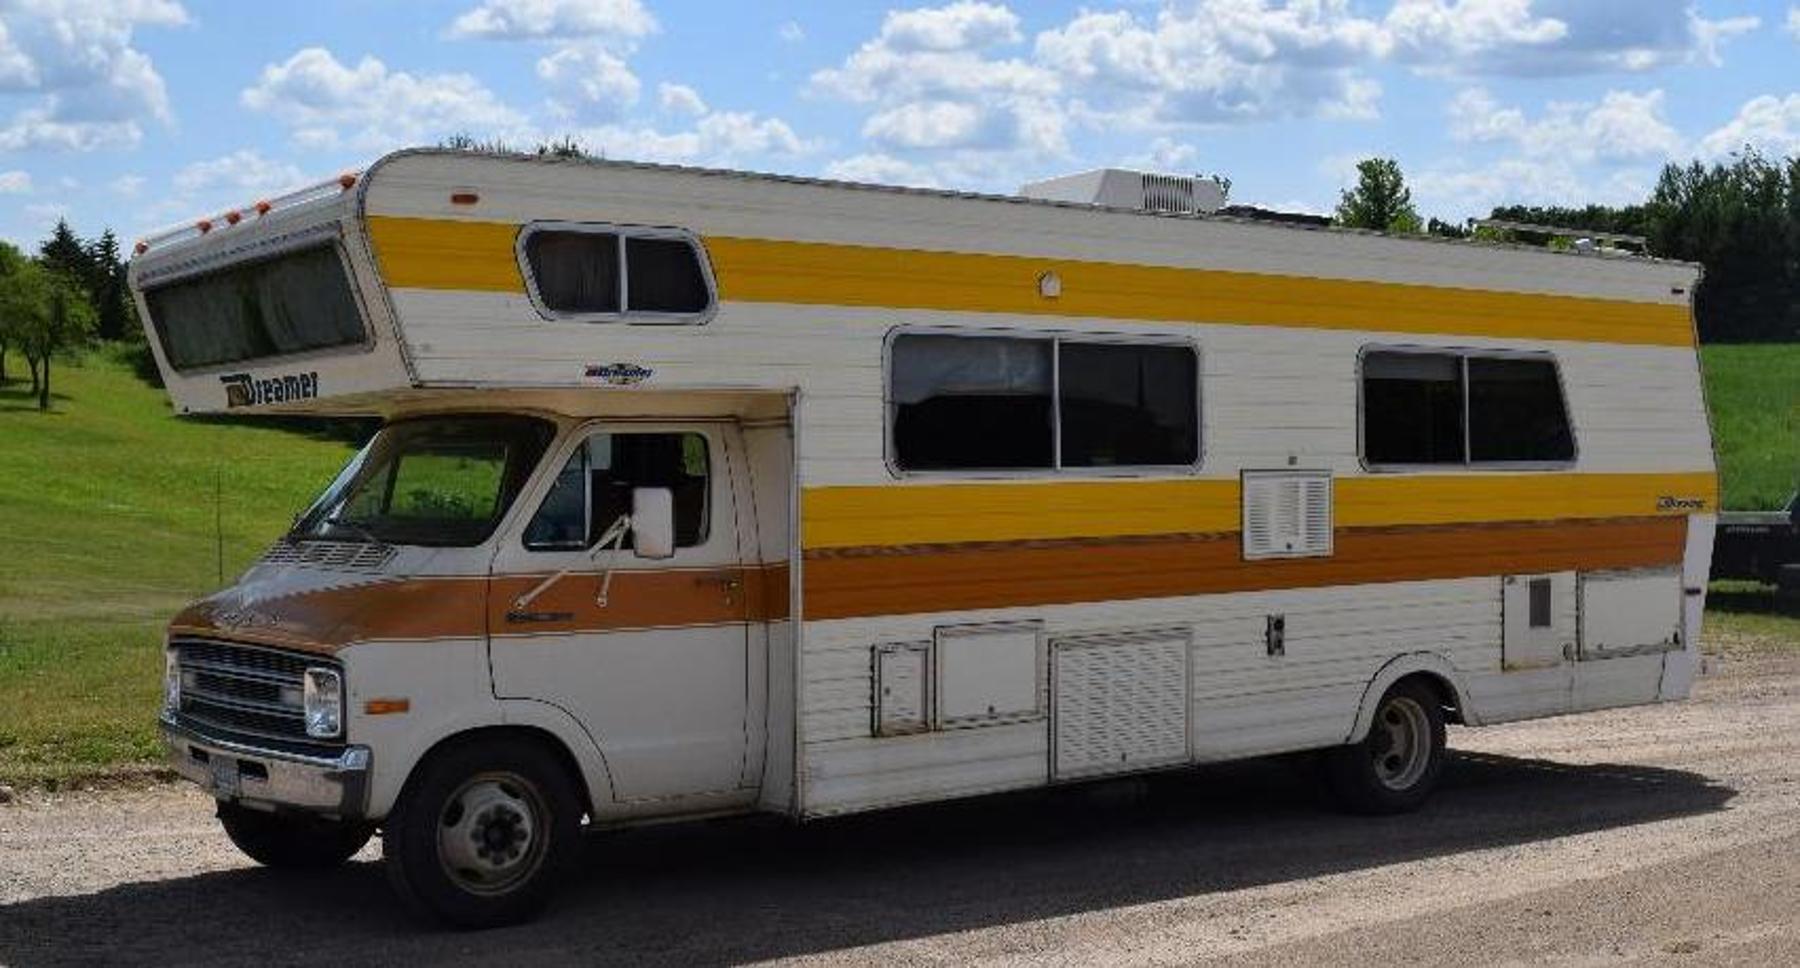 Late June Camper Auction